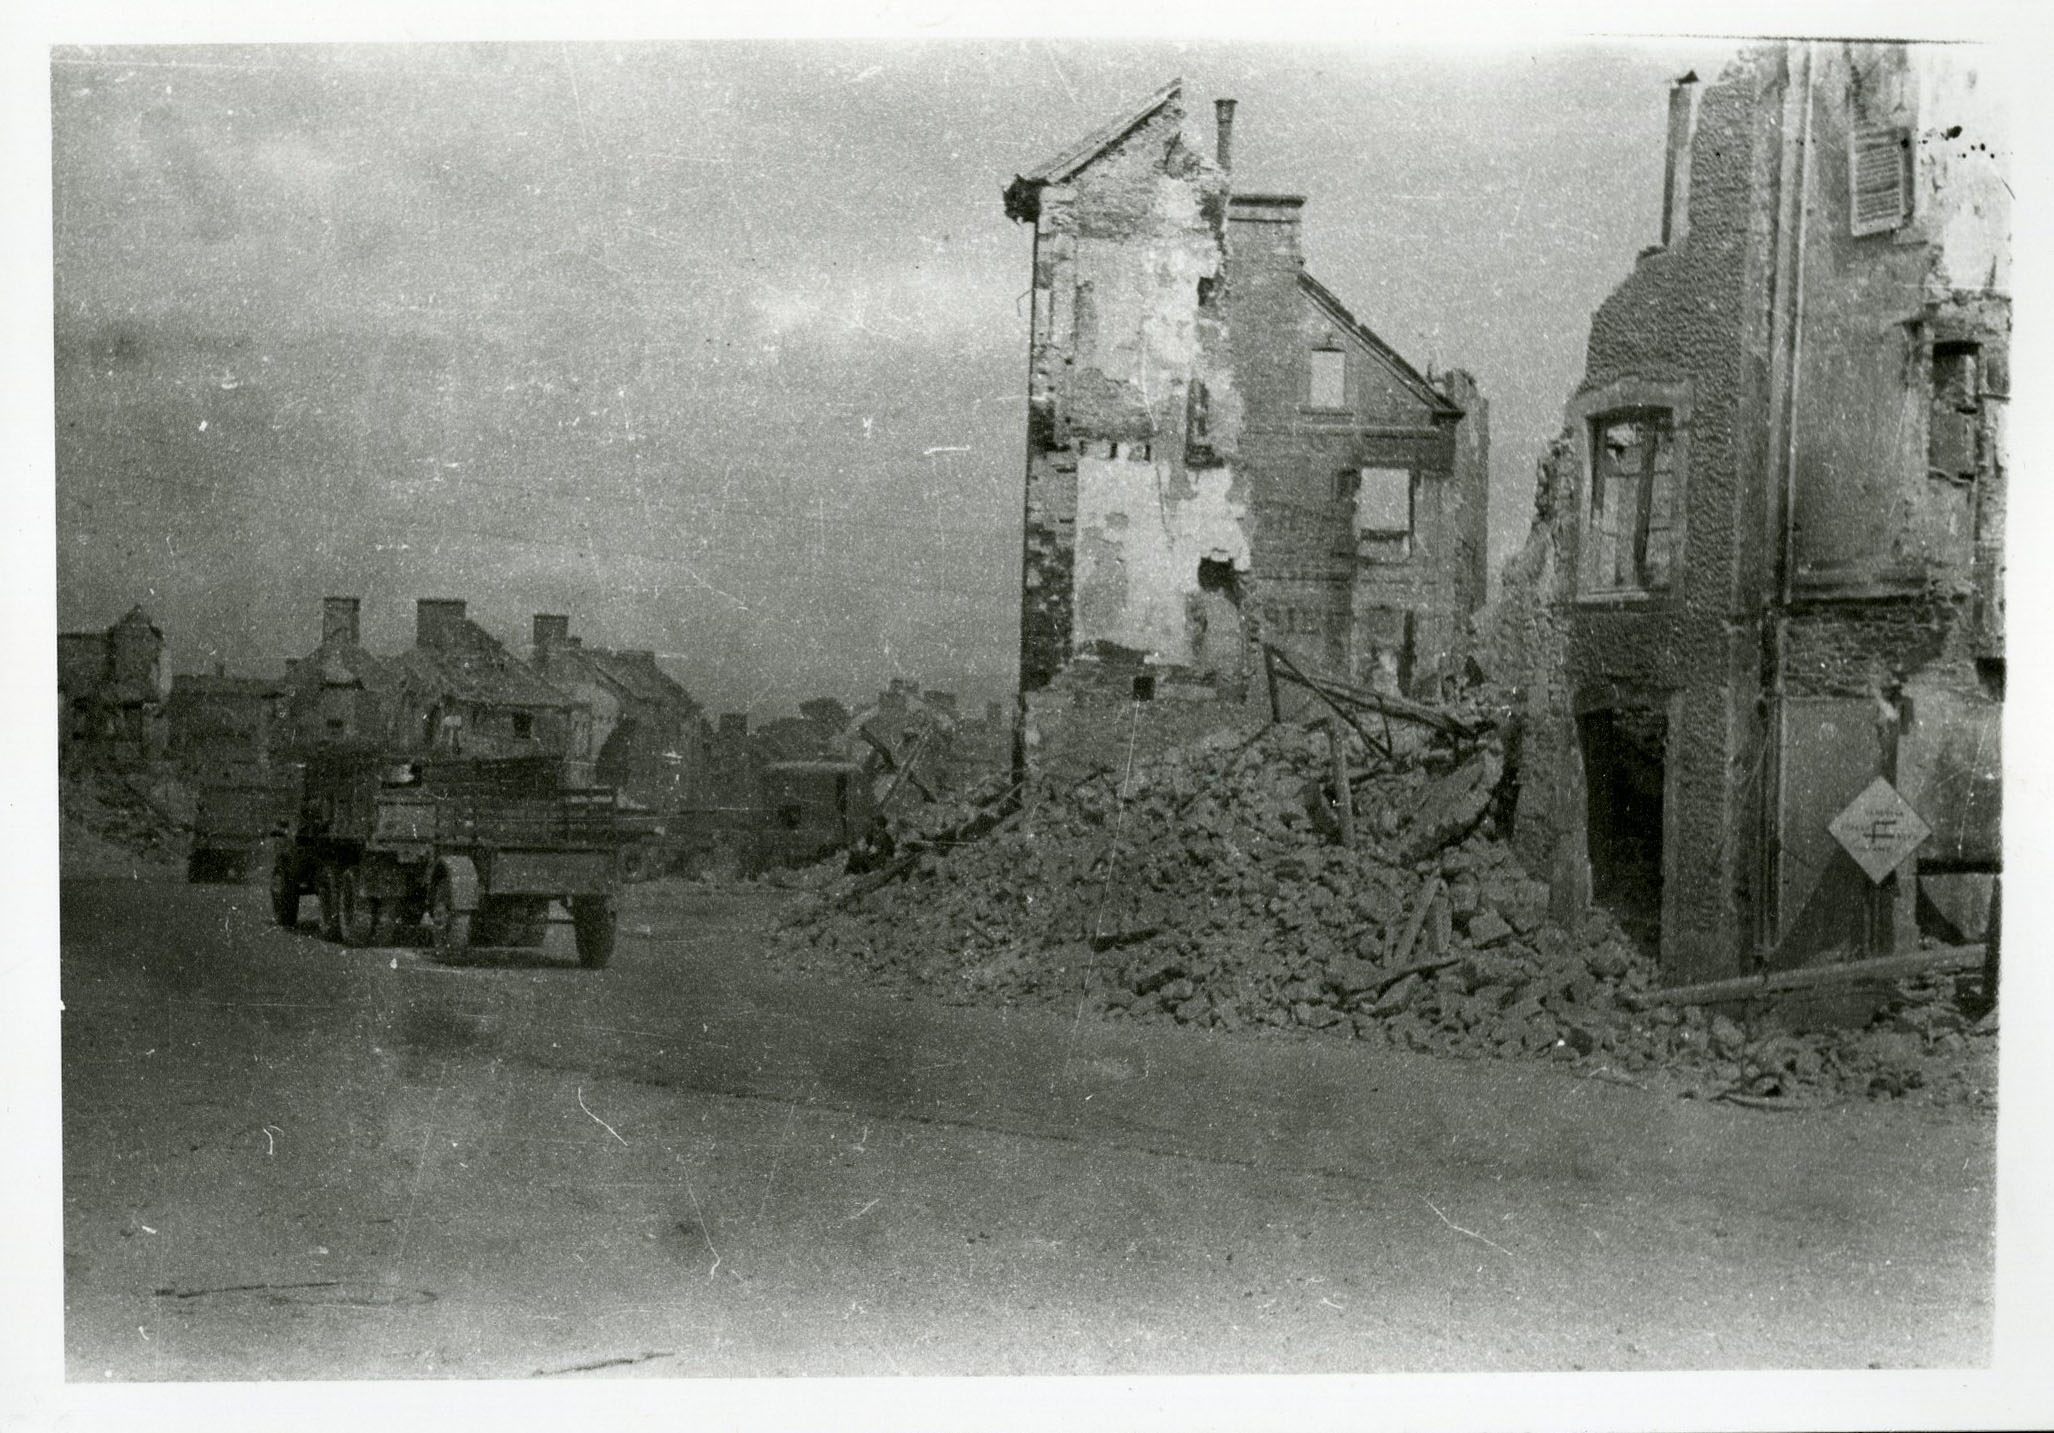 August 18, 1944 photograph taken by James W. Wall, location somewhere in France